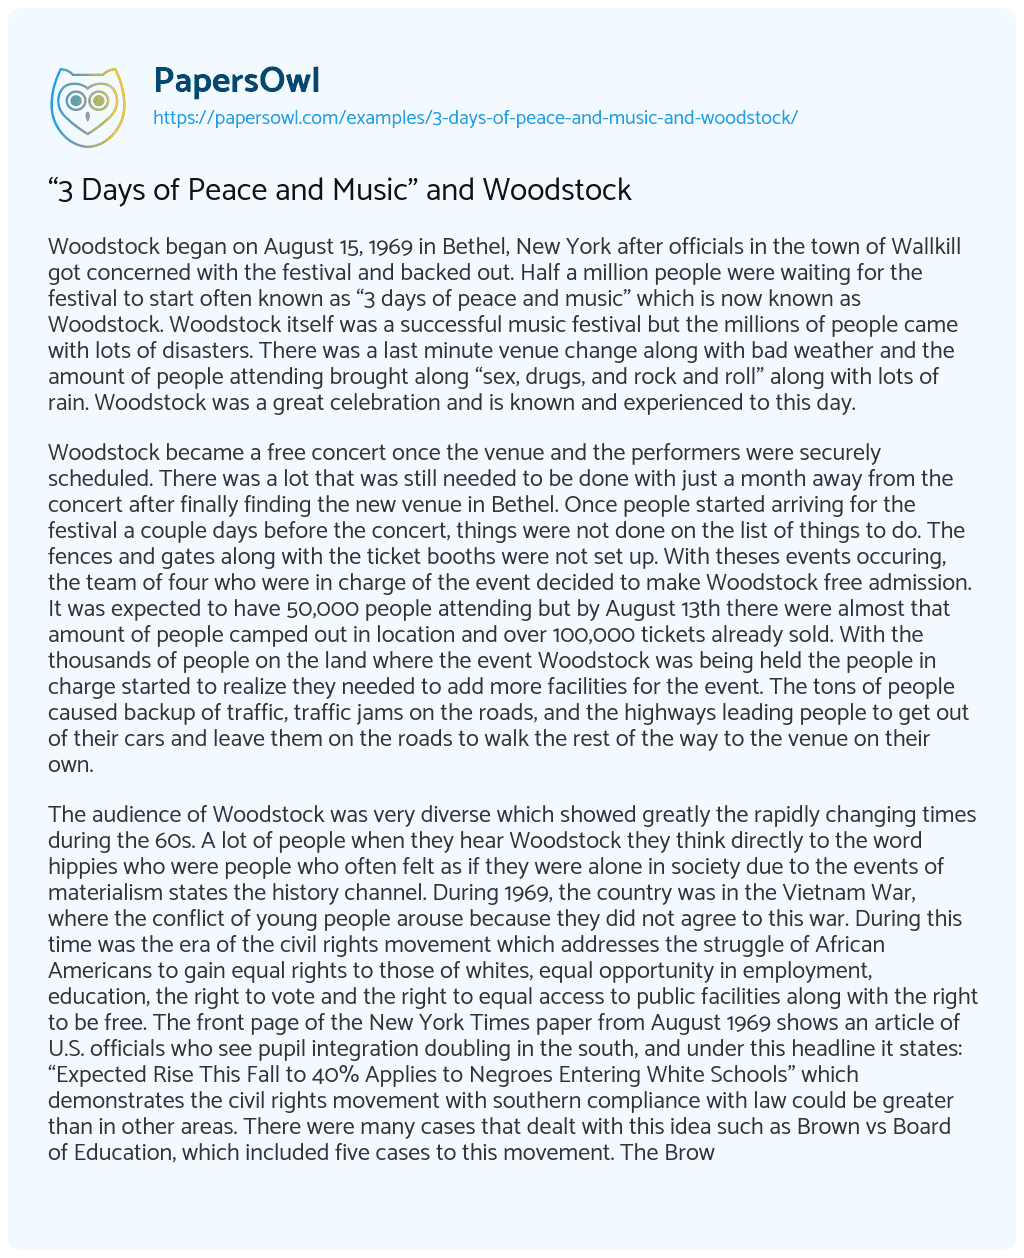 Essay on “3 Days of Peace and Music” and Woodstock